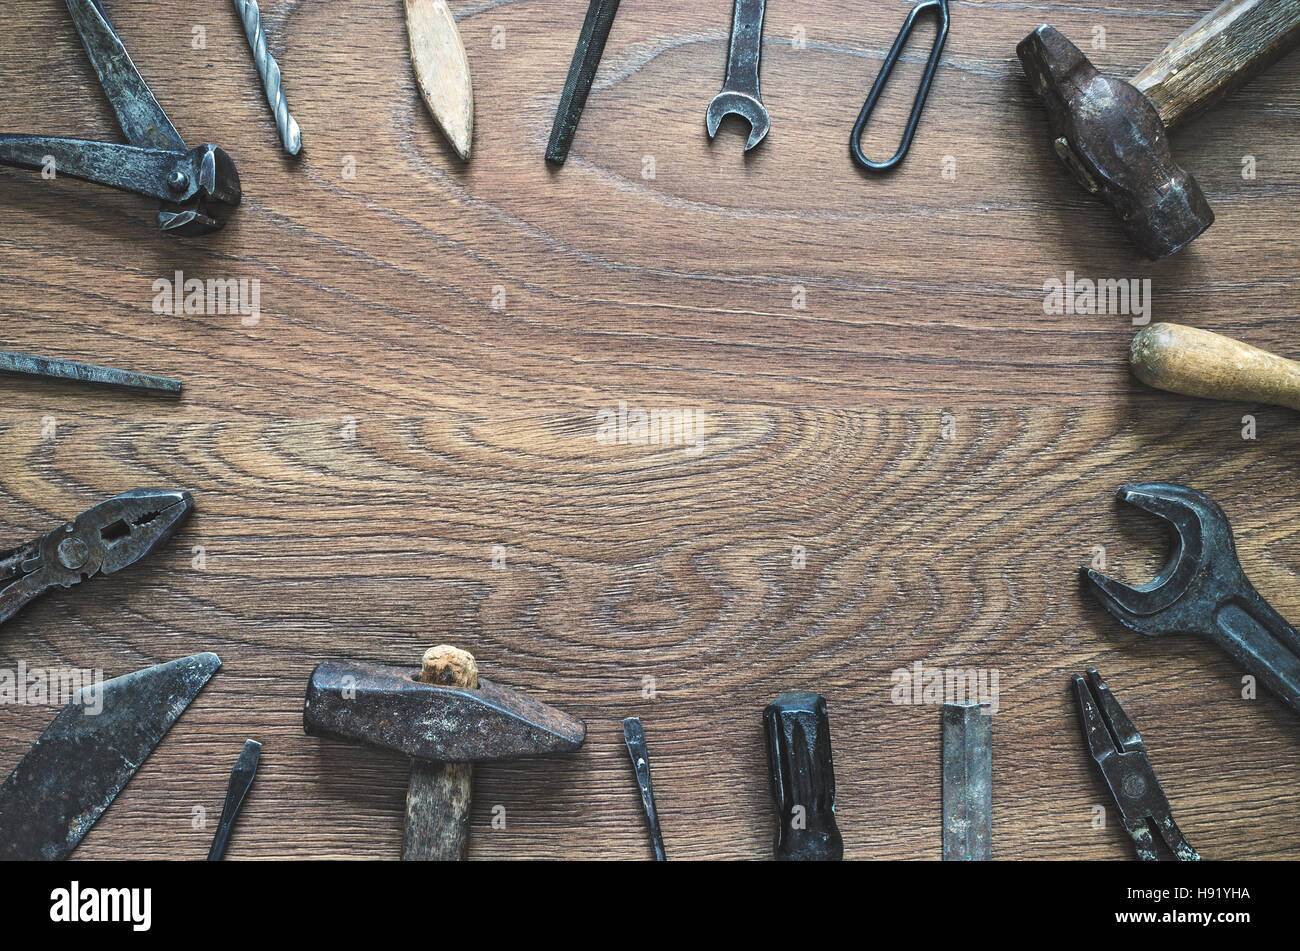 Rustic old used tools hammer wrench screwdriver nose plyers 24325941 Stock  Photo at Vecteezy